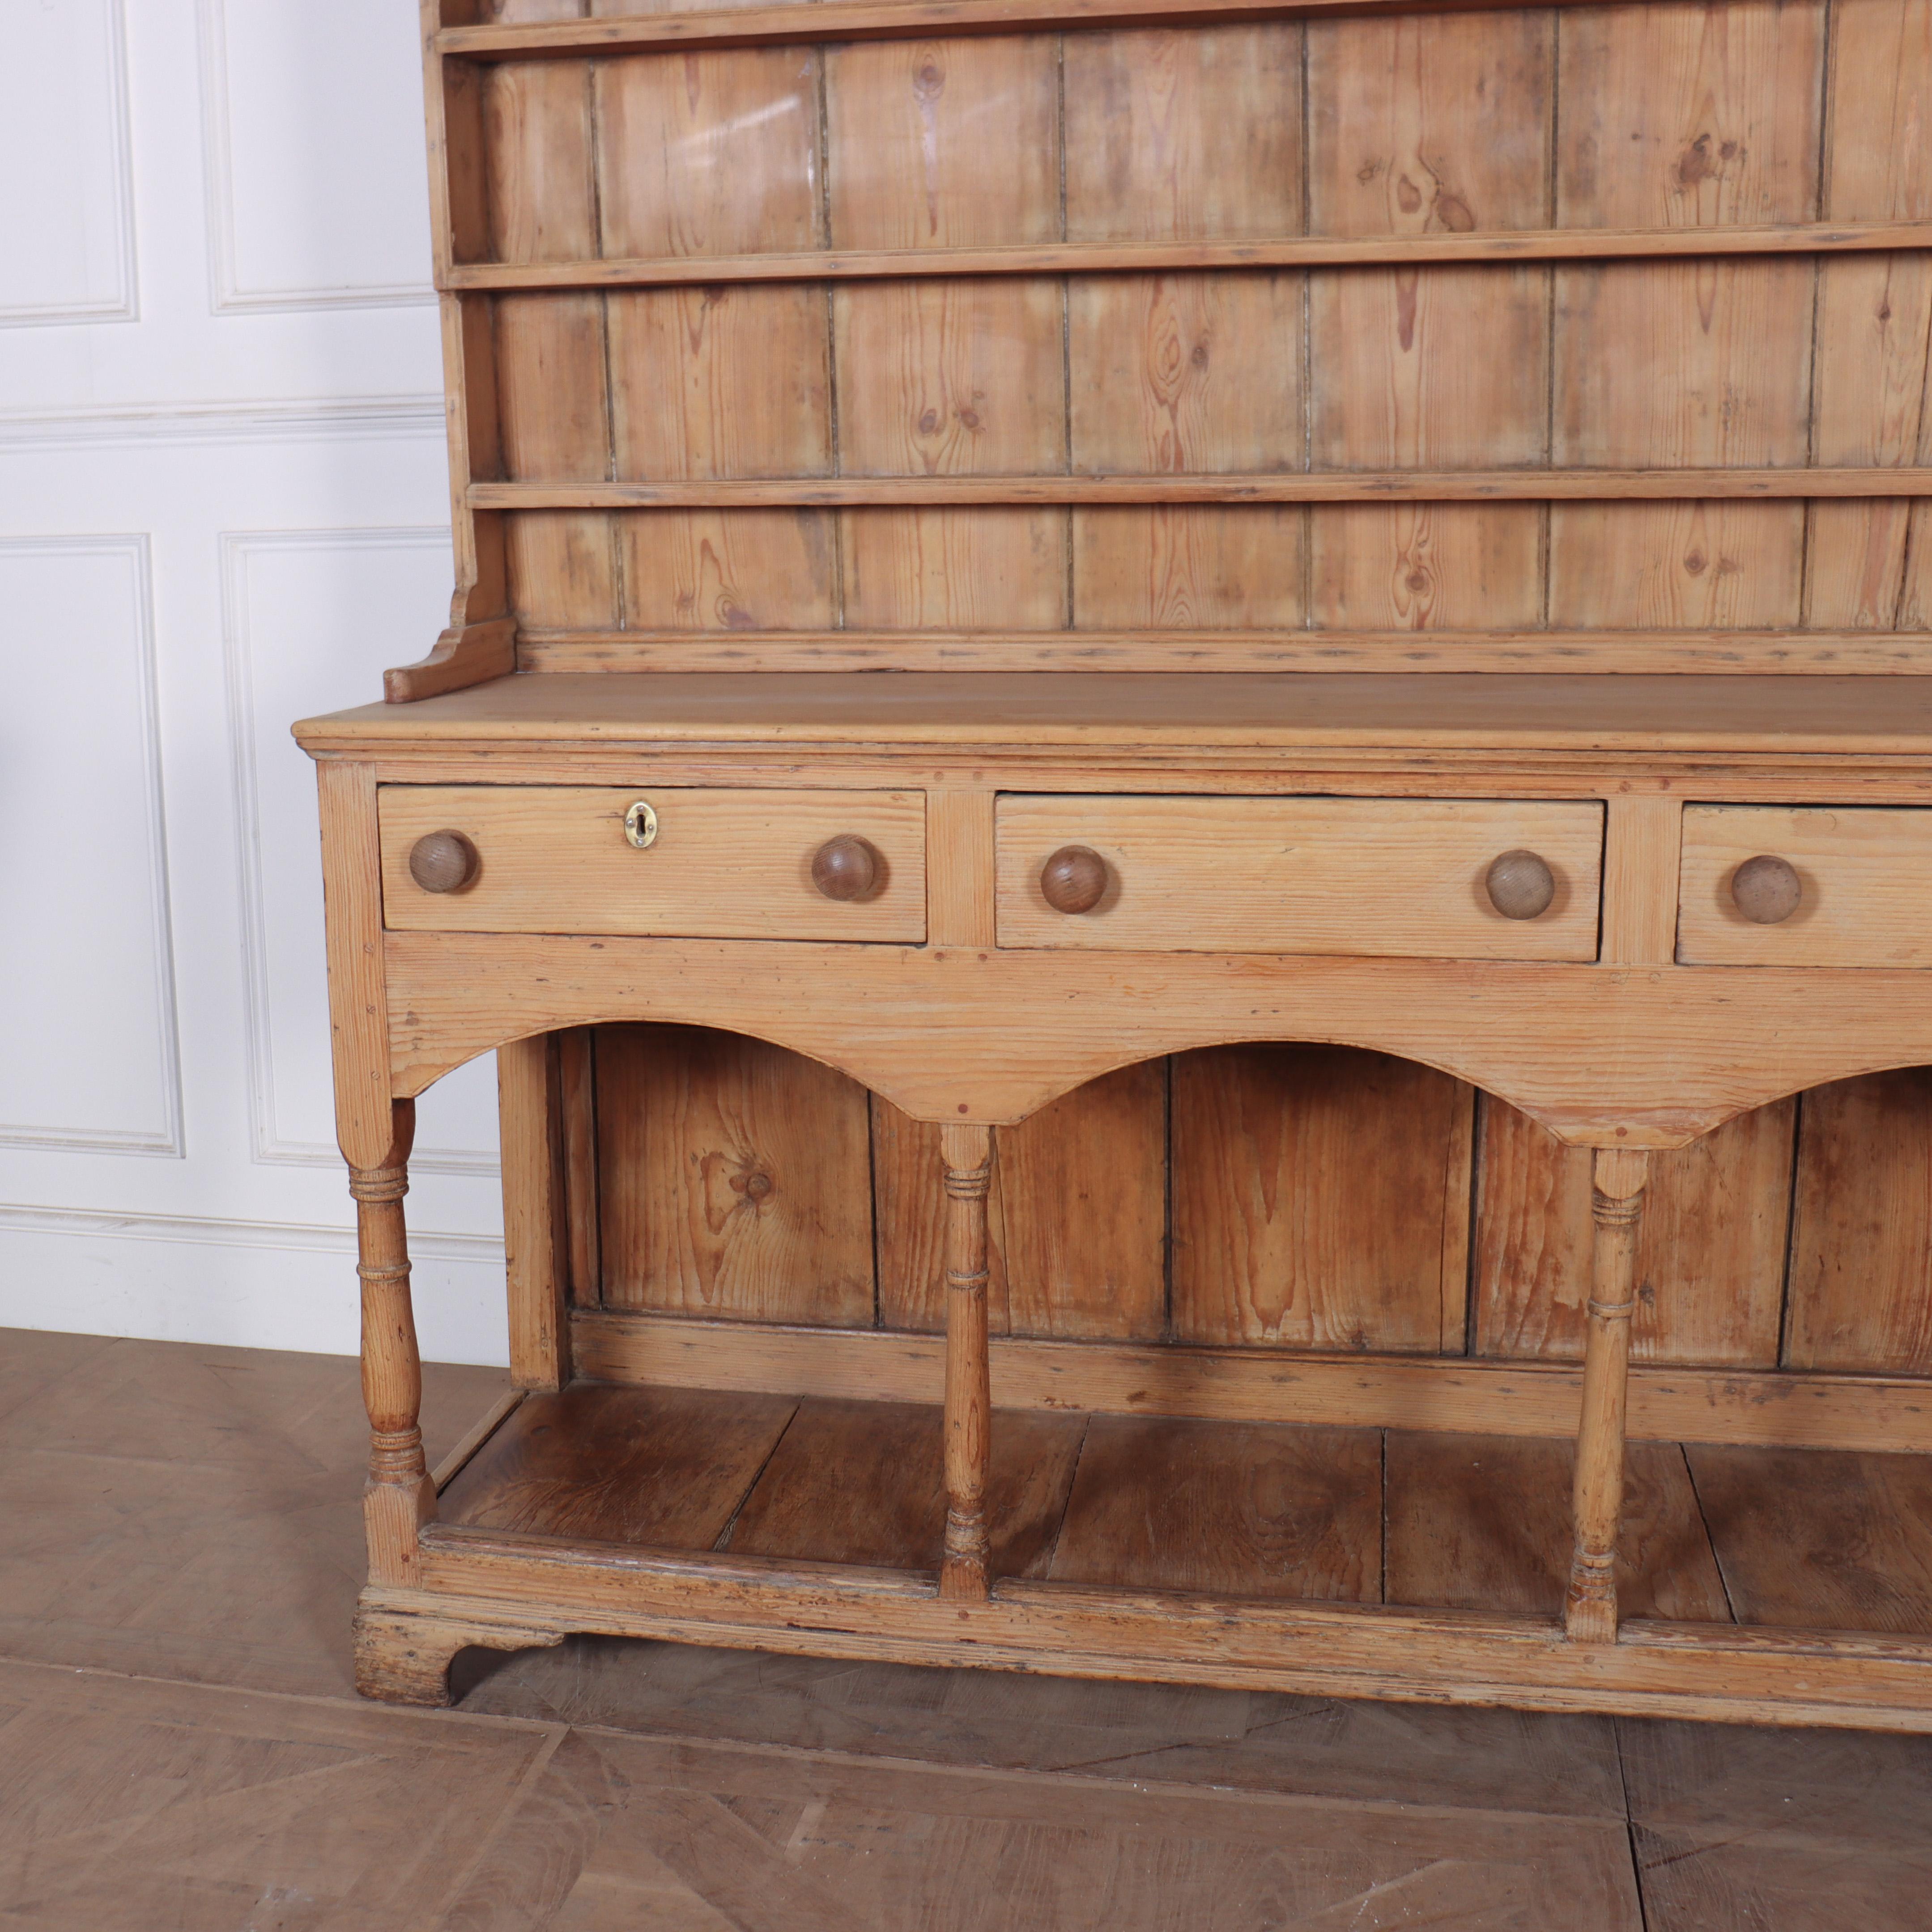 Early 19th C Welsh pine potboard dresser lovely mellow colour. 1820.

Dimensions
67 inches (170 cms) Wide
19.5 inches (50 cms) Deep
77.5 inches (197 cms) High.